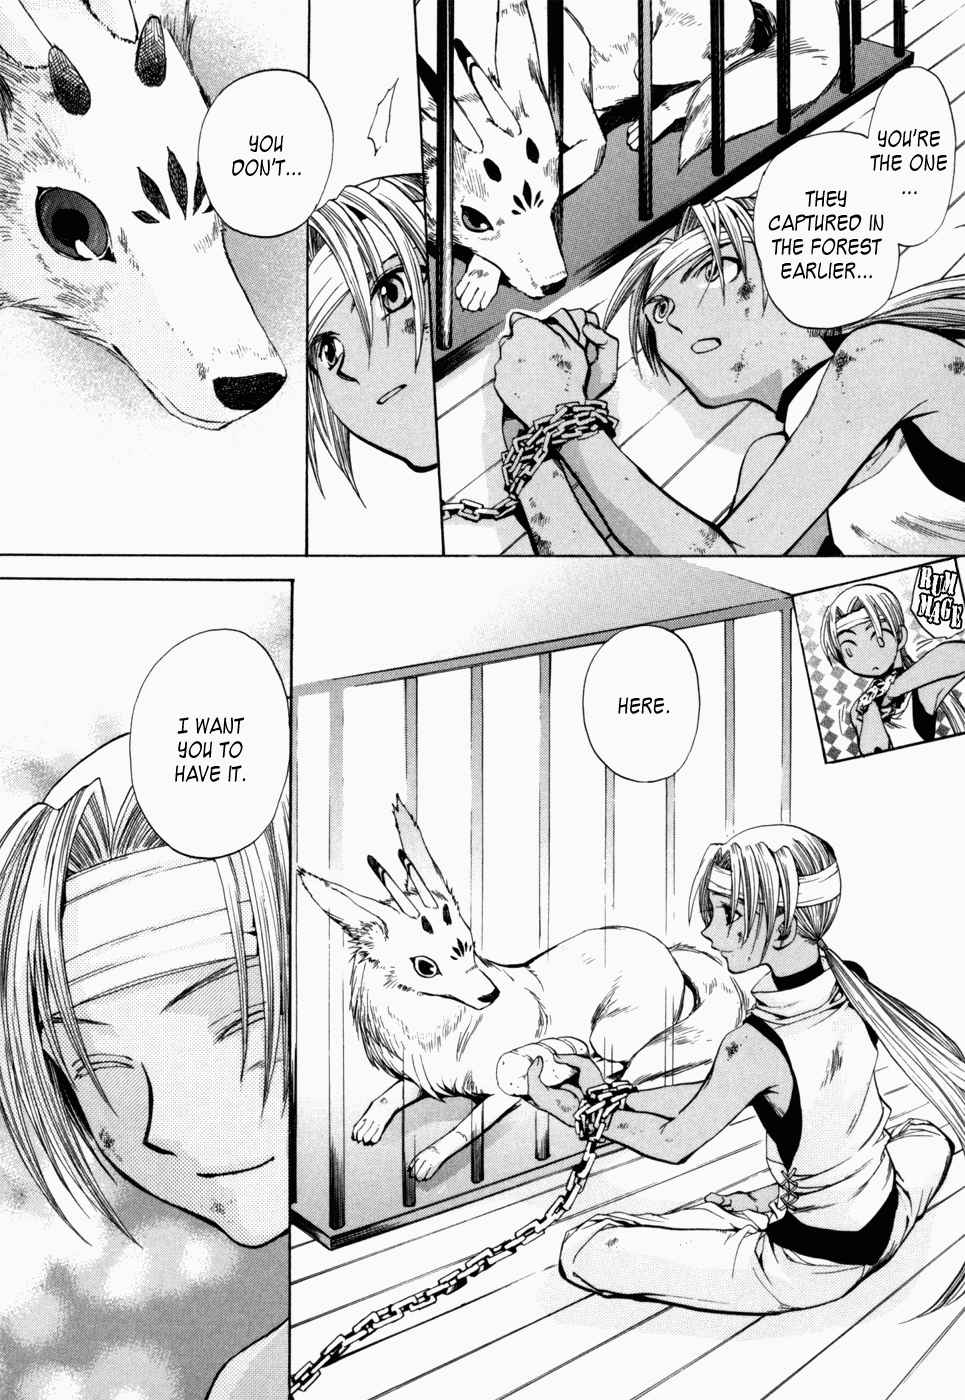 Lost Beasts of Another World Vol. 1 Ch. 2